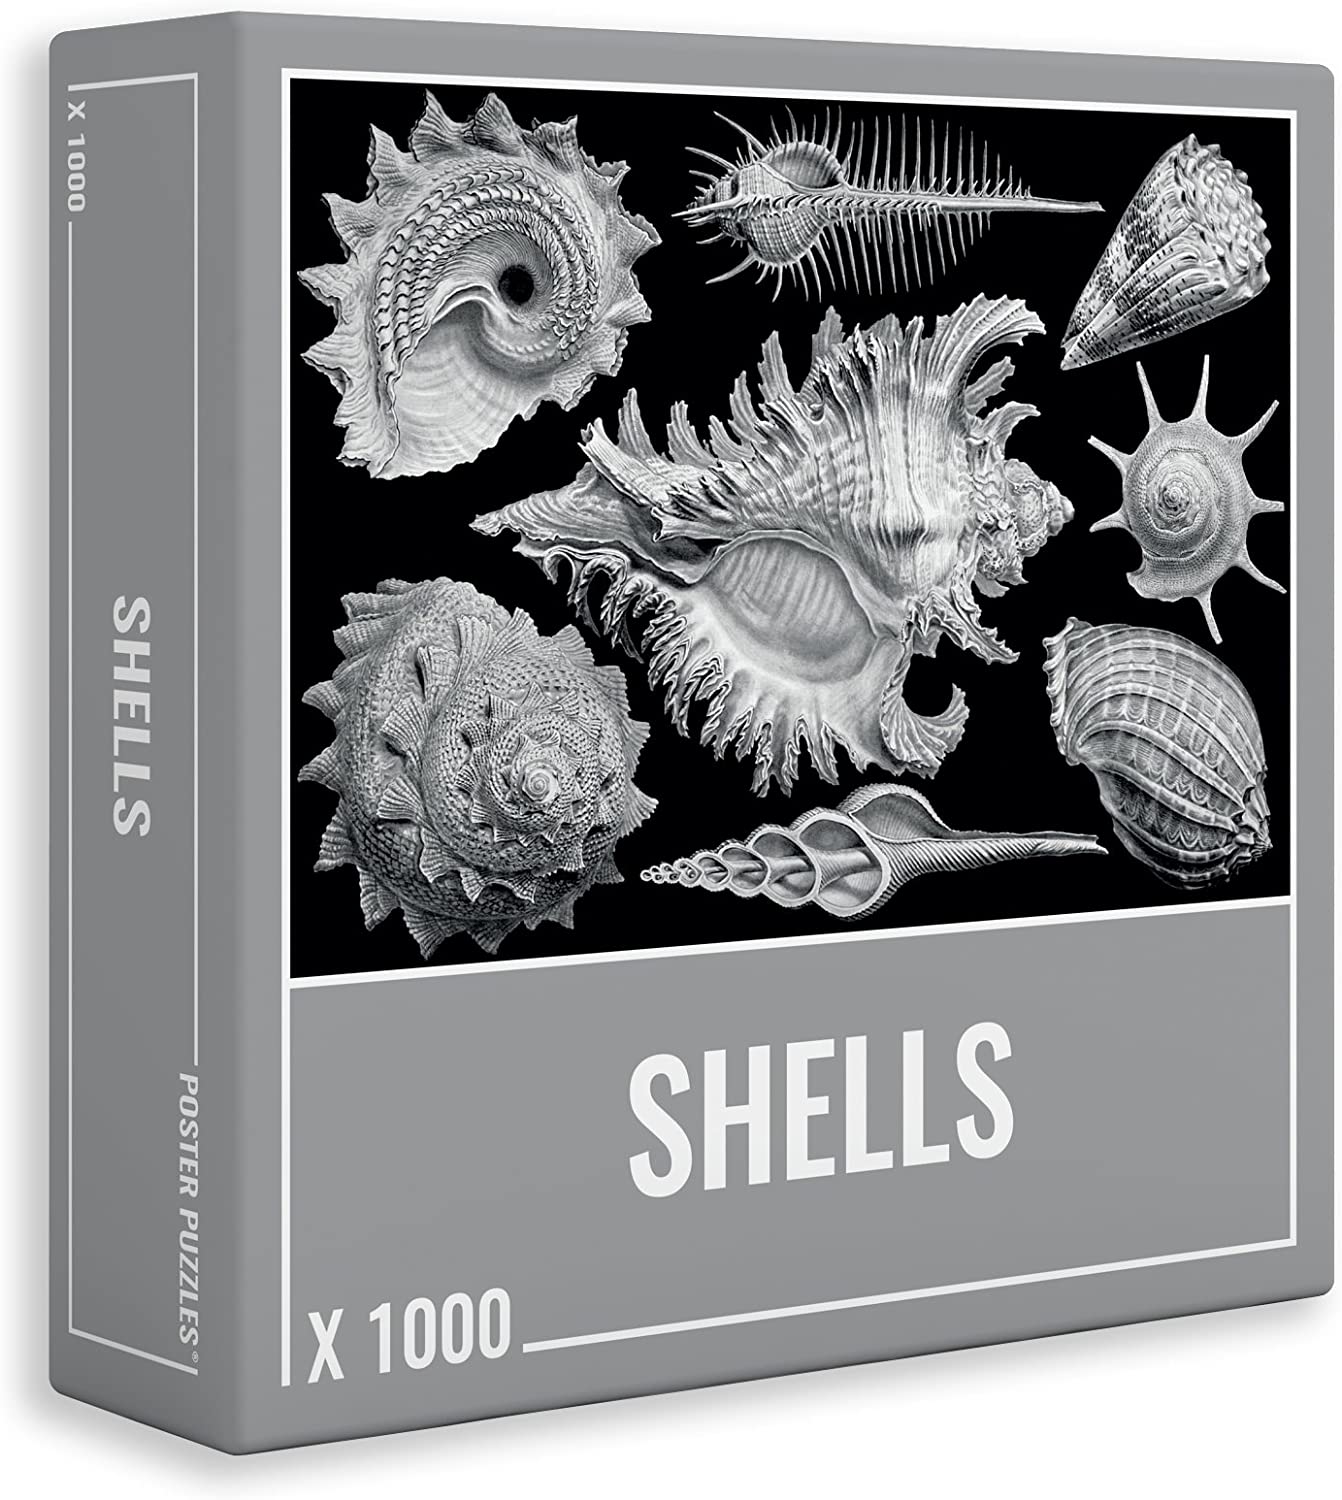 Shells Jigsaw Puzzle (1000 pieces) & Poster by Cloudberries